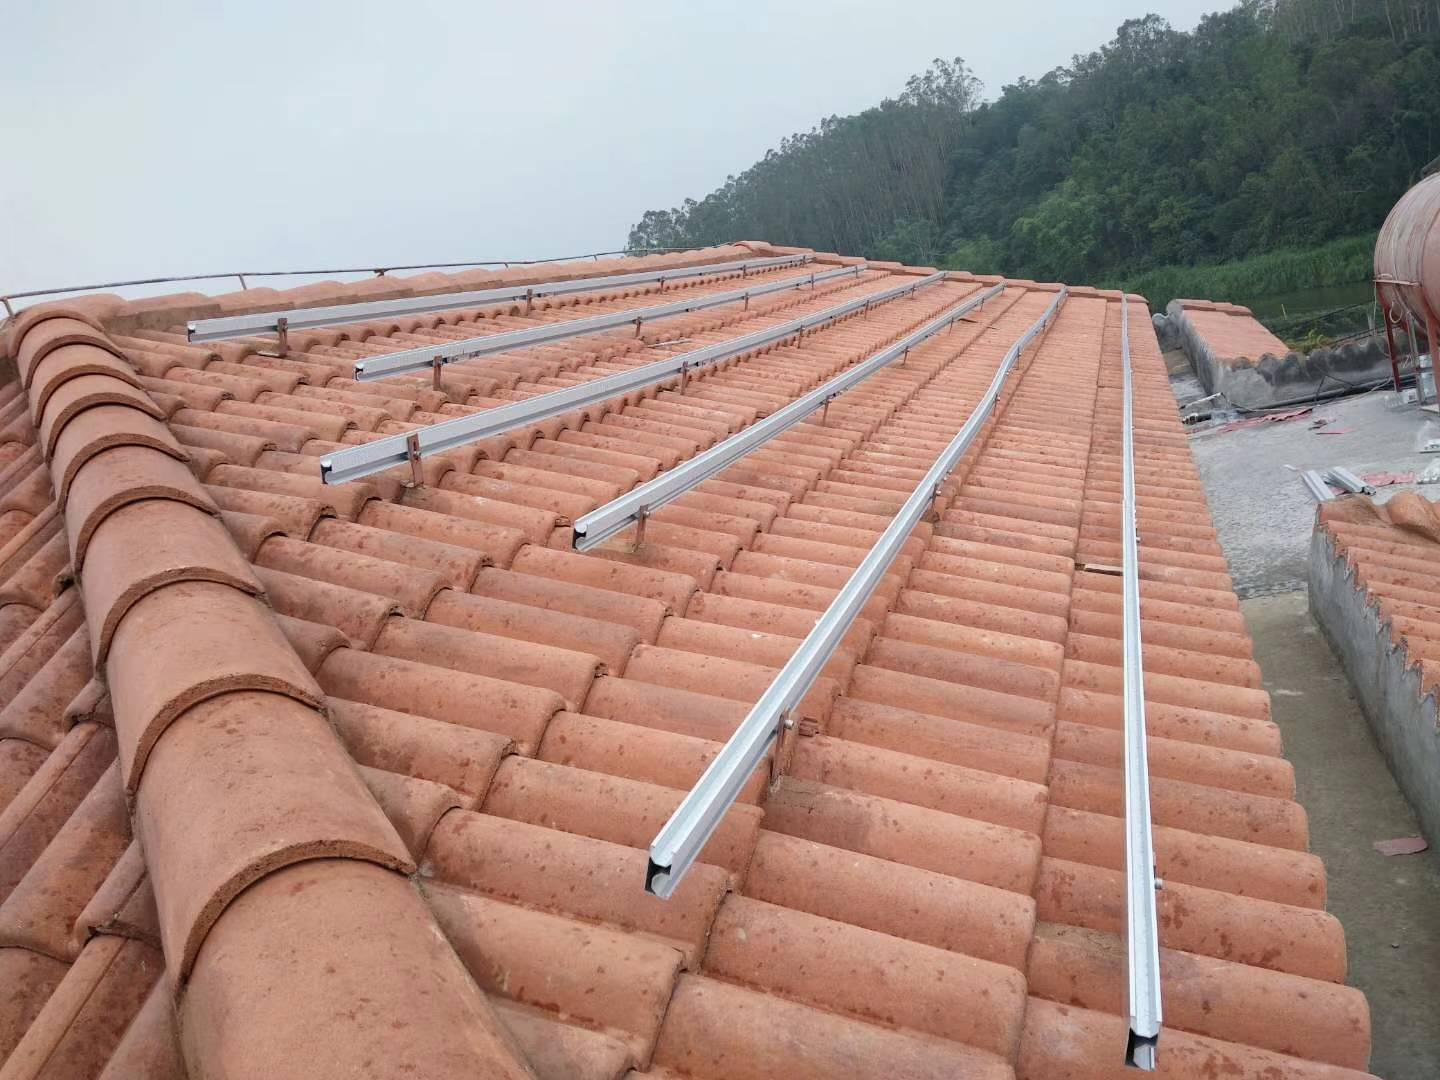 Tile roof mounting system